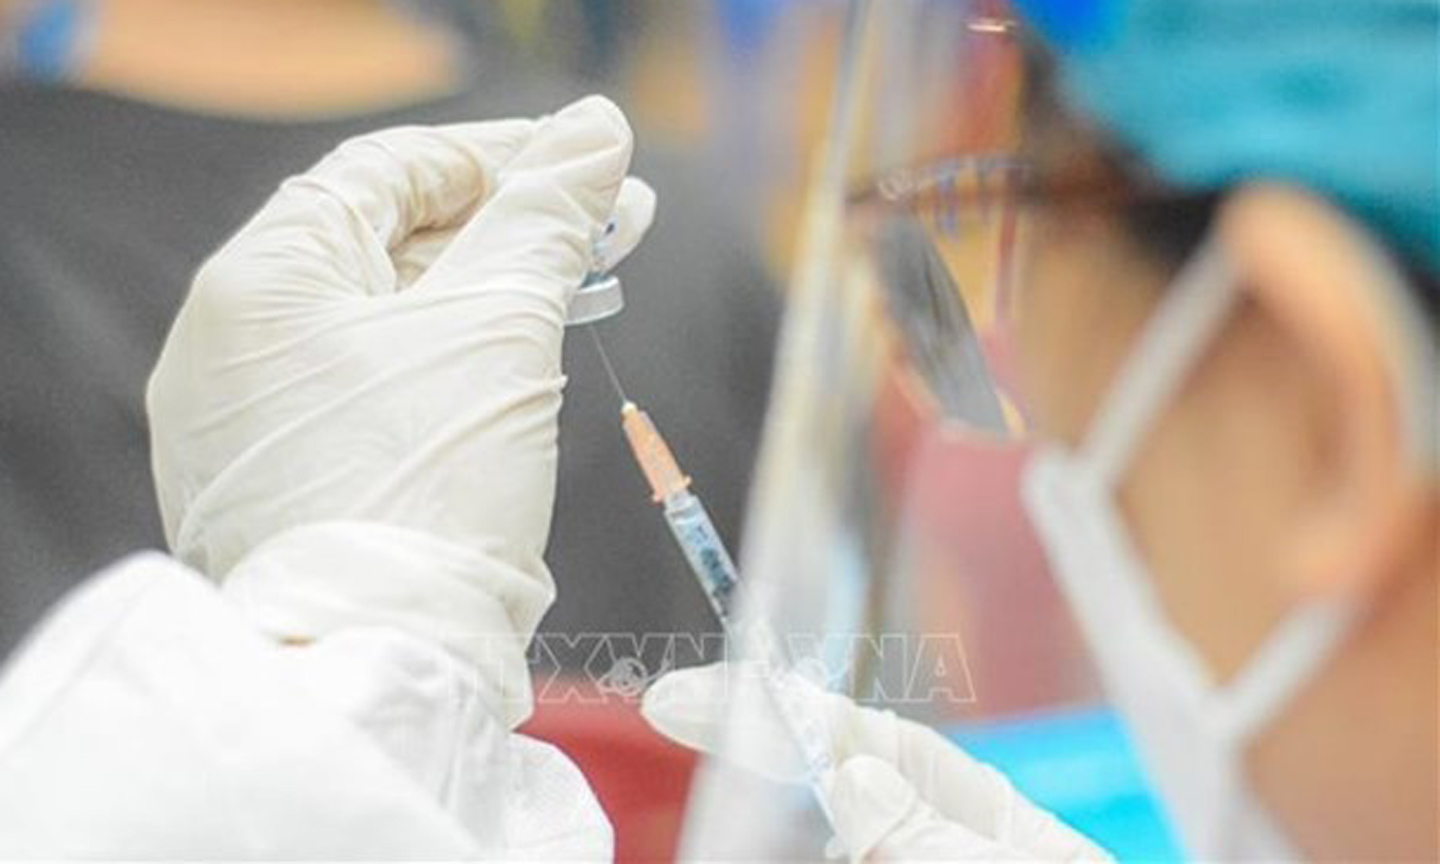 Health ministry carries out programme to ensure vaccine supply until 2030 (Photo: VNA).